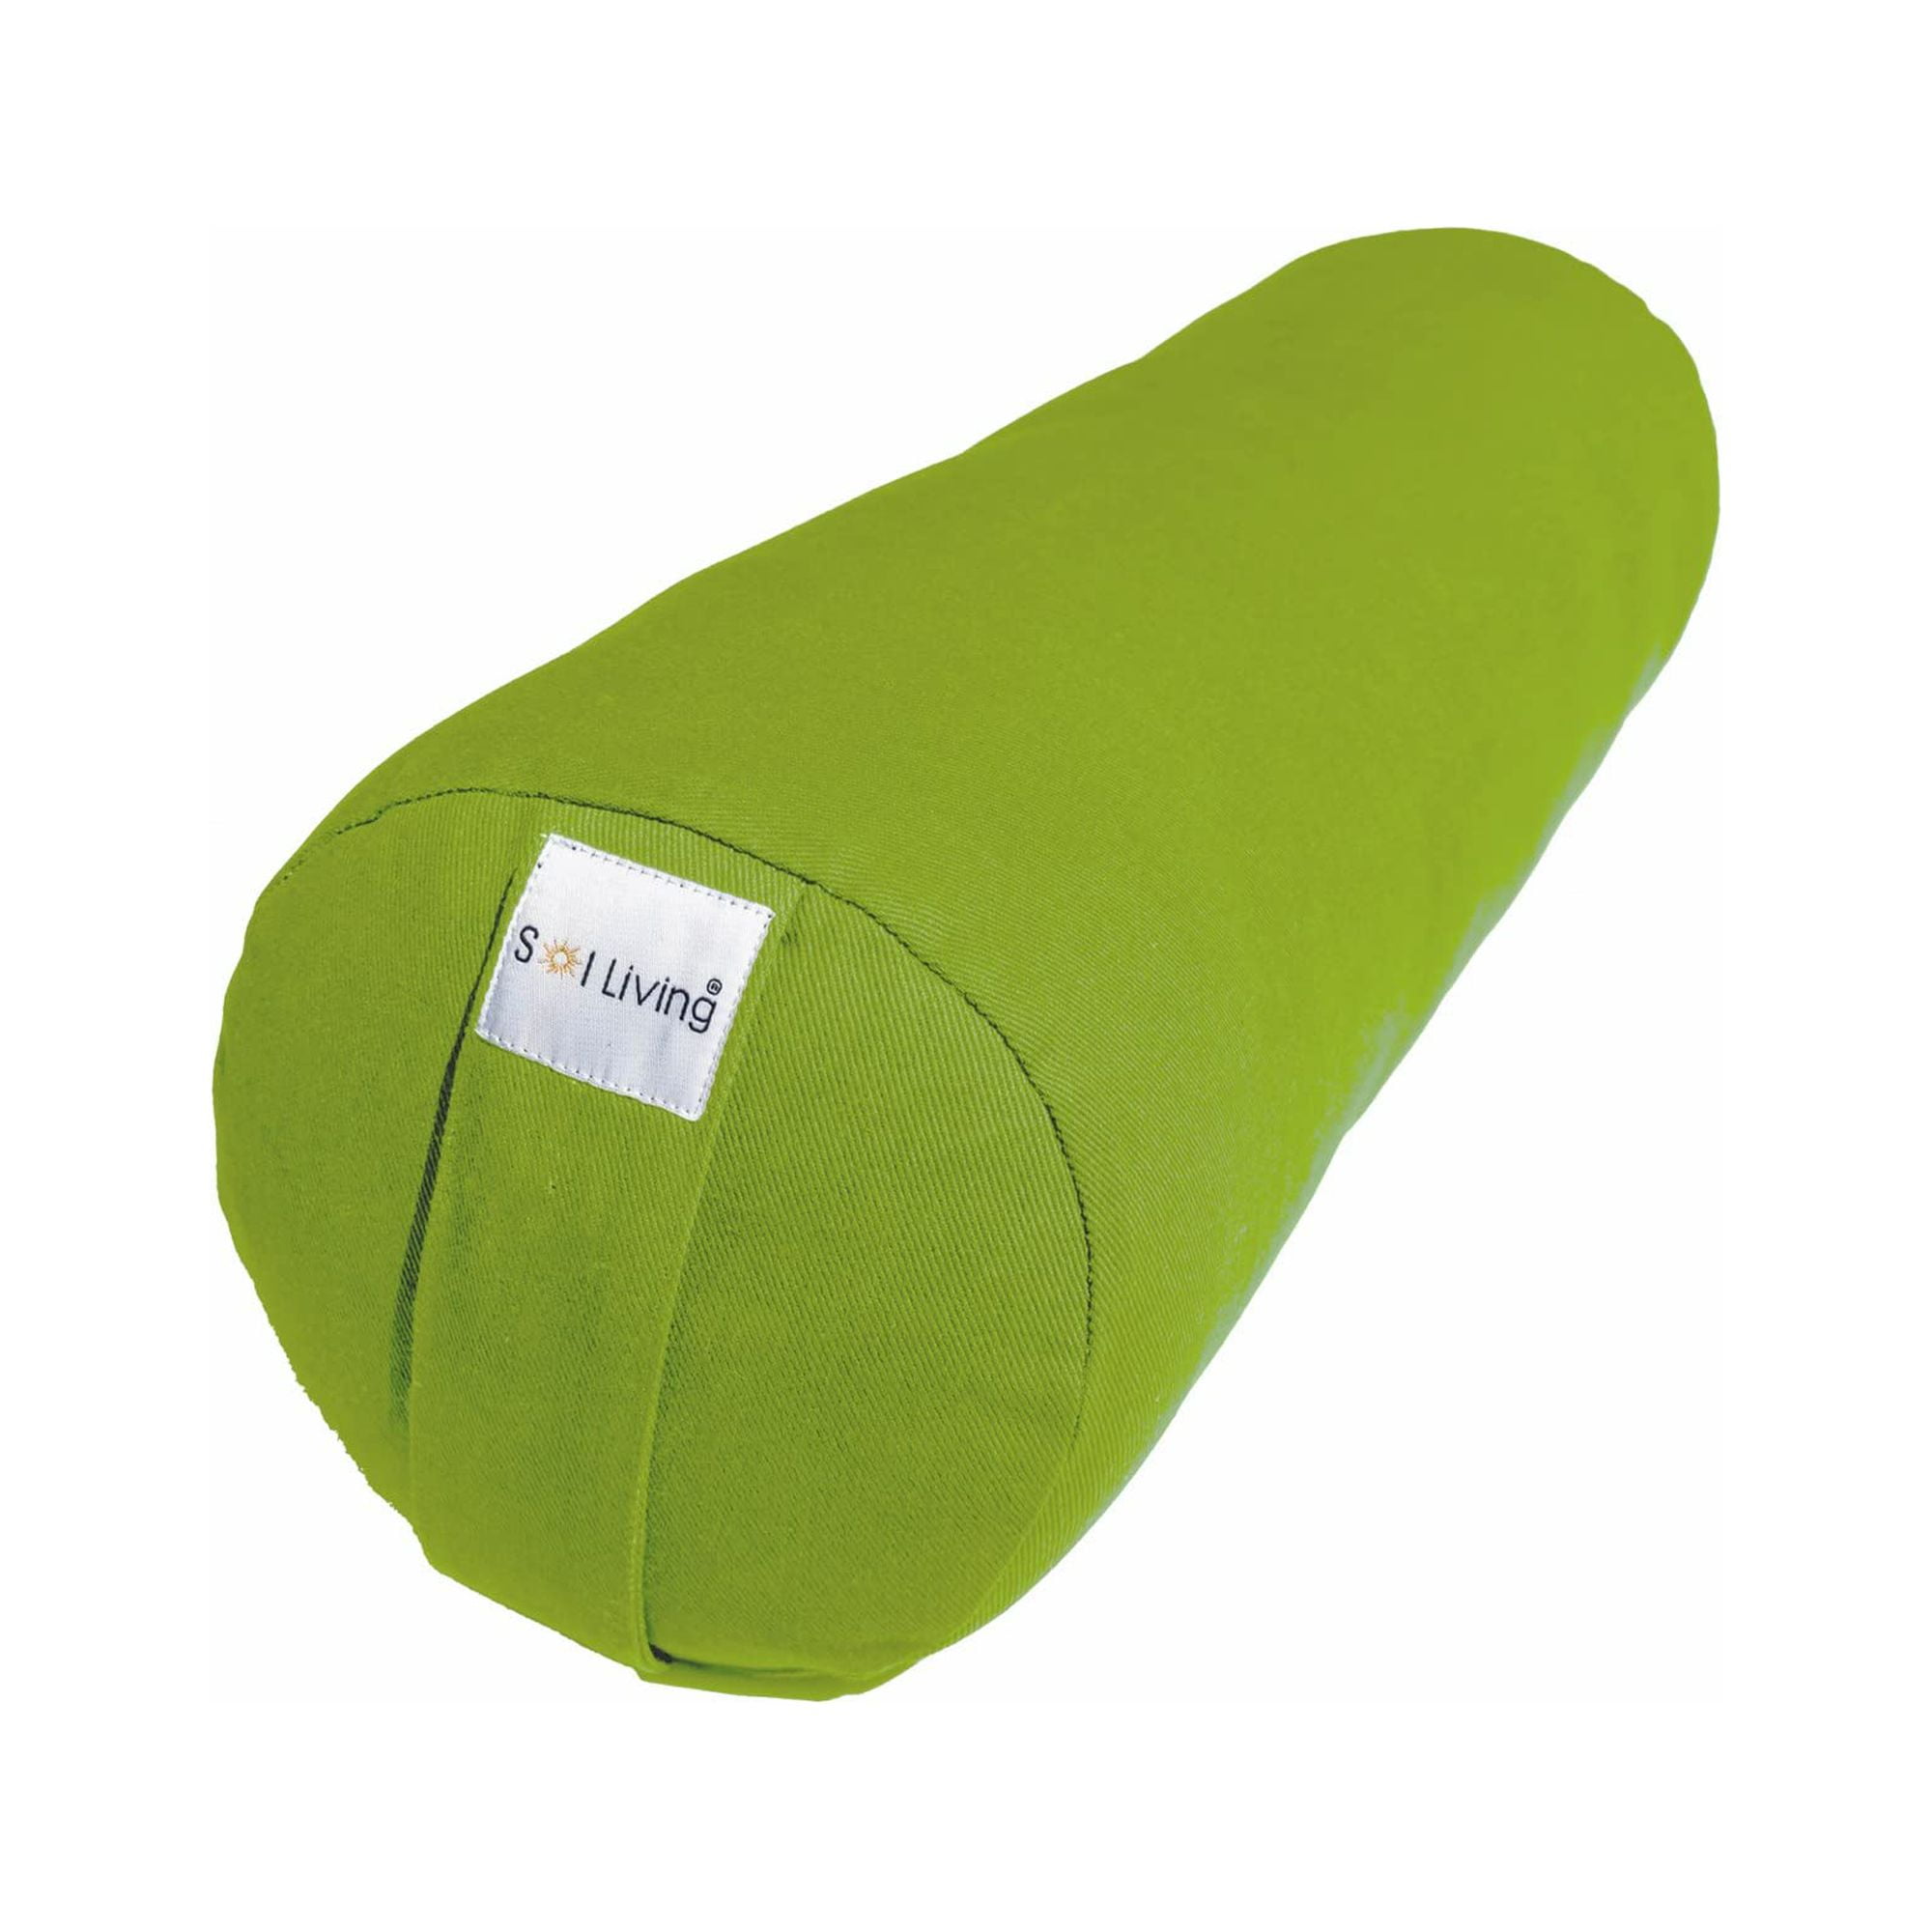 HipPillowPlus is a natural, cooling, multifunctional, adjustable, and  compact body pillow that is made with biodegradable and sustainable materi